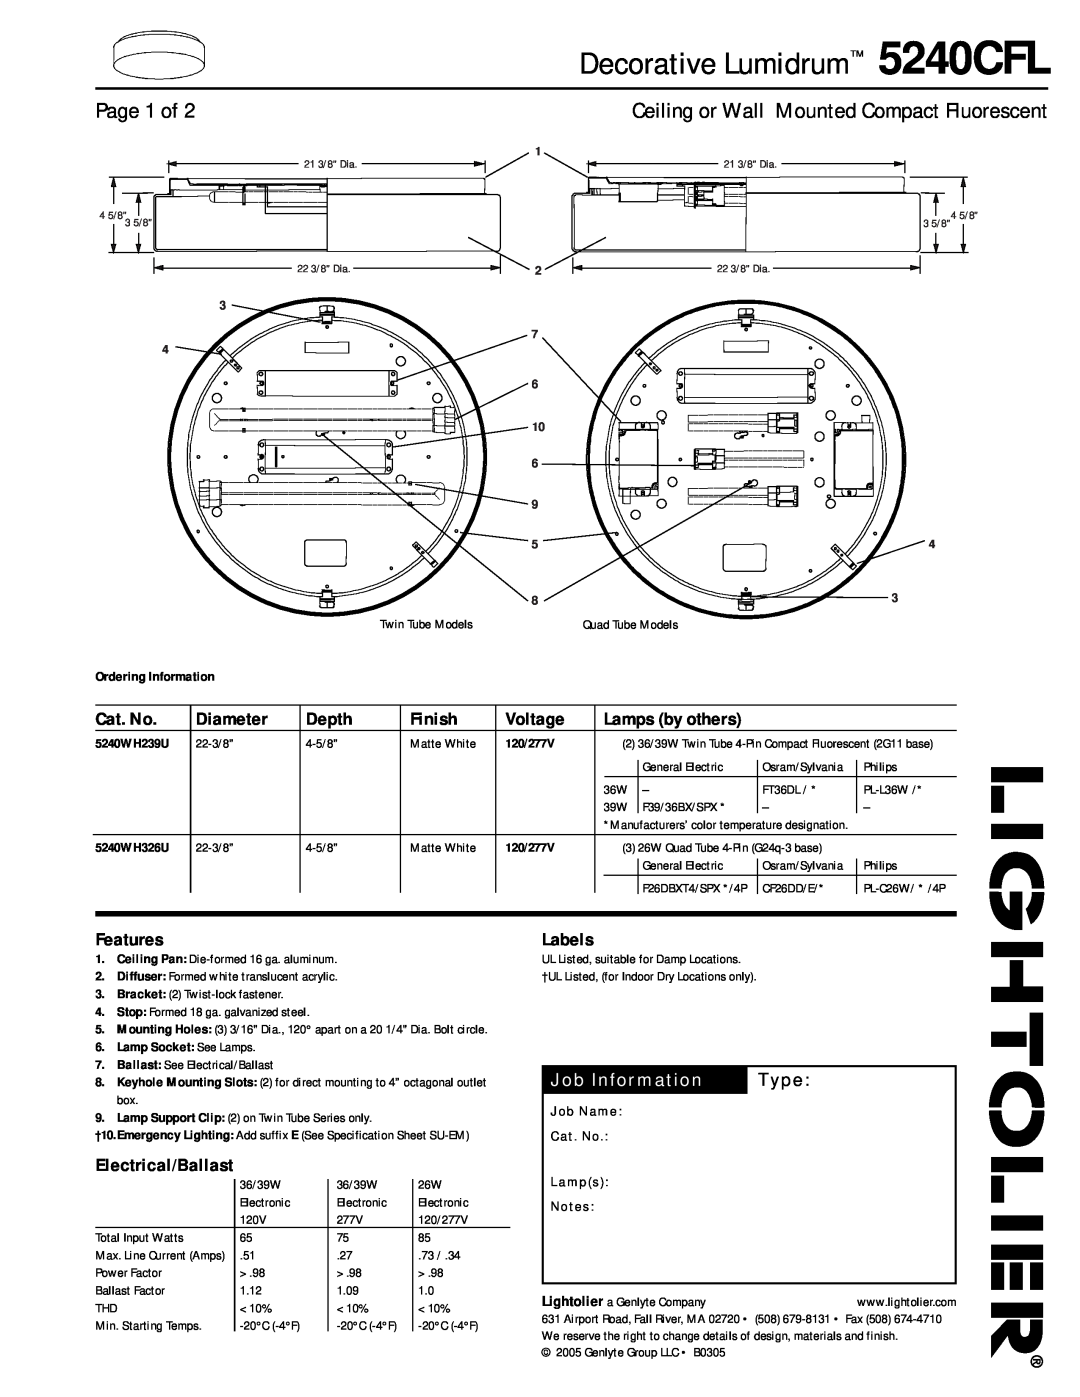 Lightolier specifications Decorative Lumidrum 5240CFL, Page 1 of, Lamps by others, Job Information, Type, 1 2 7 6 